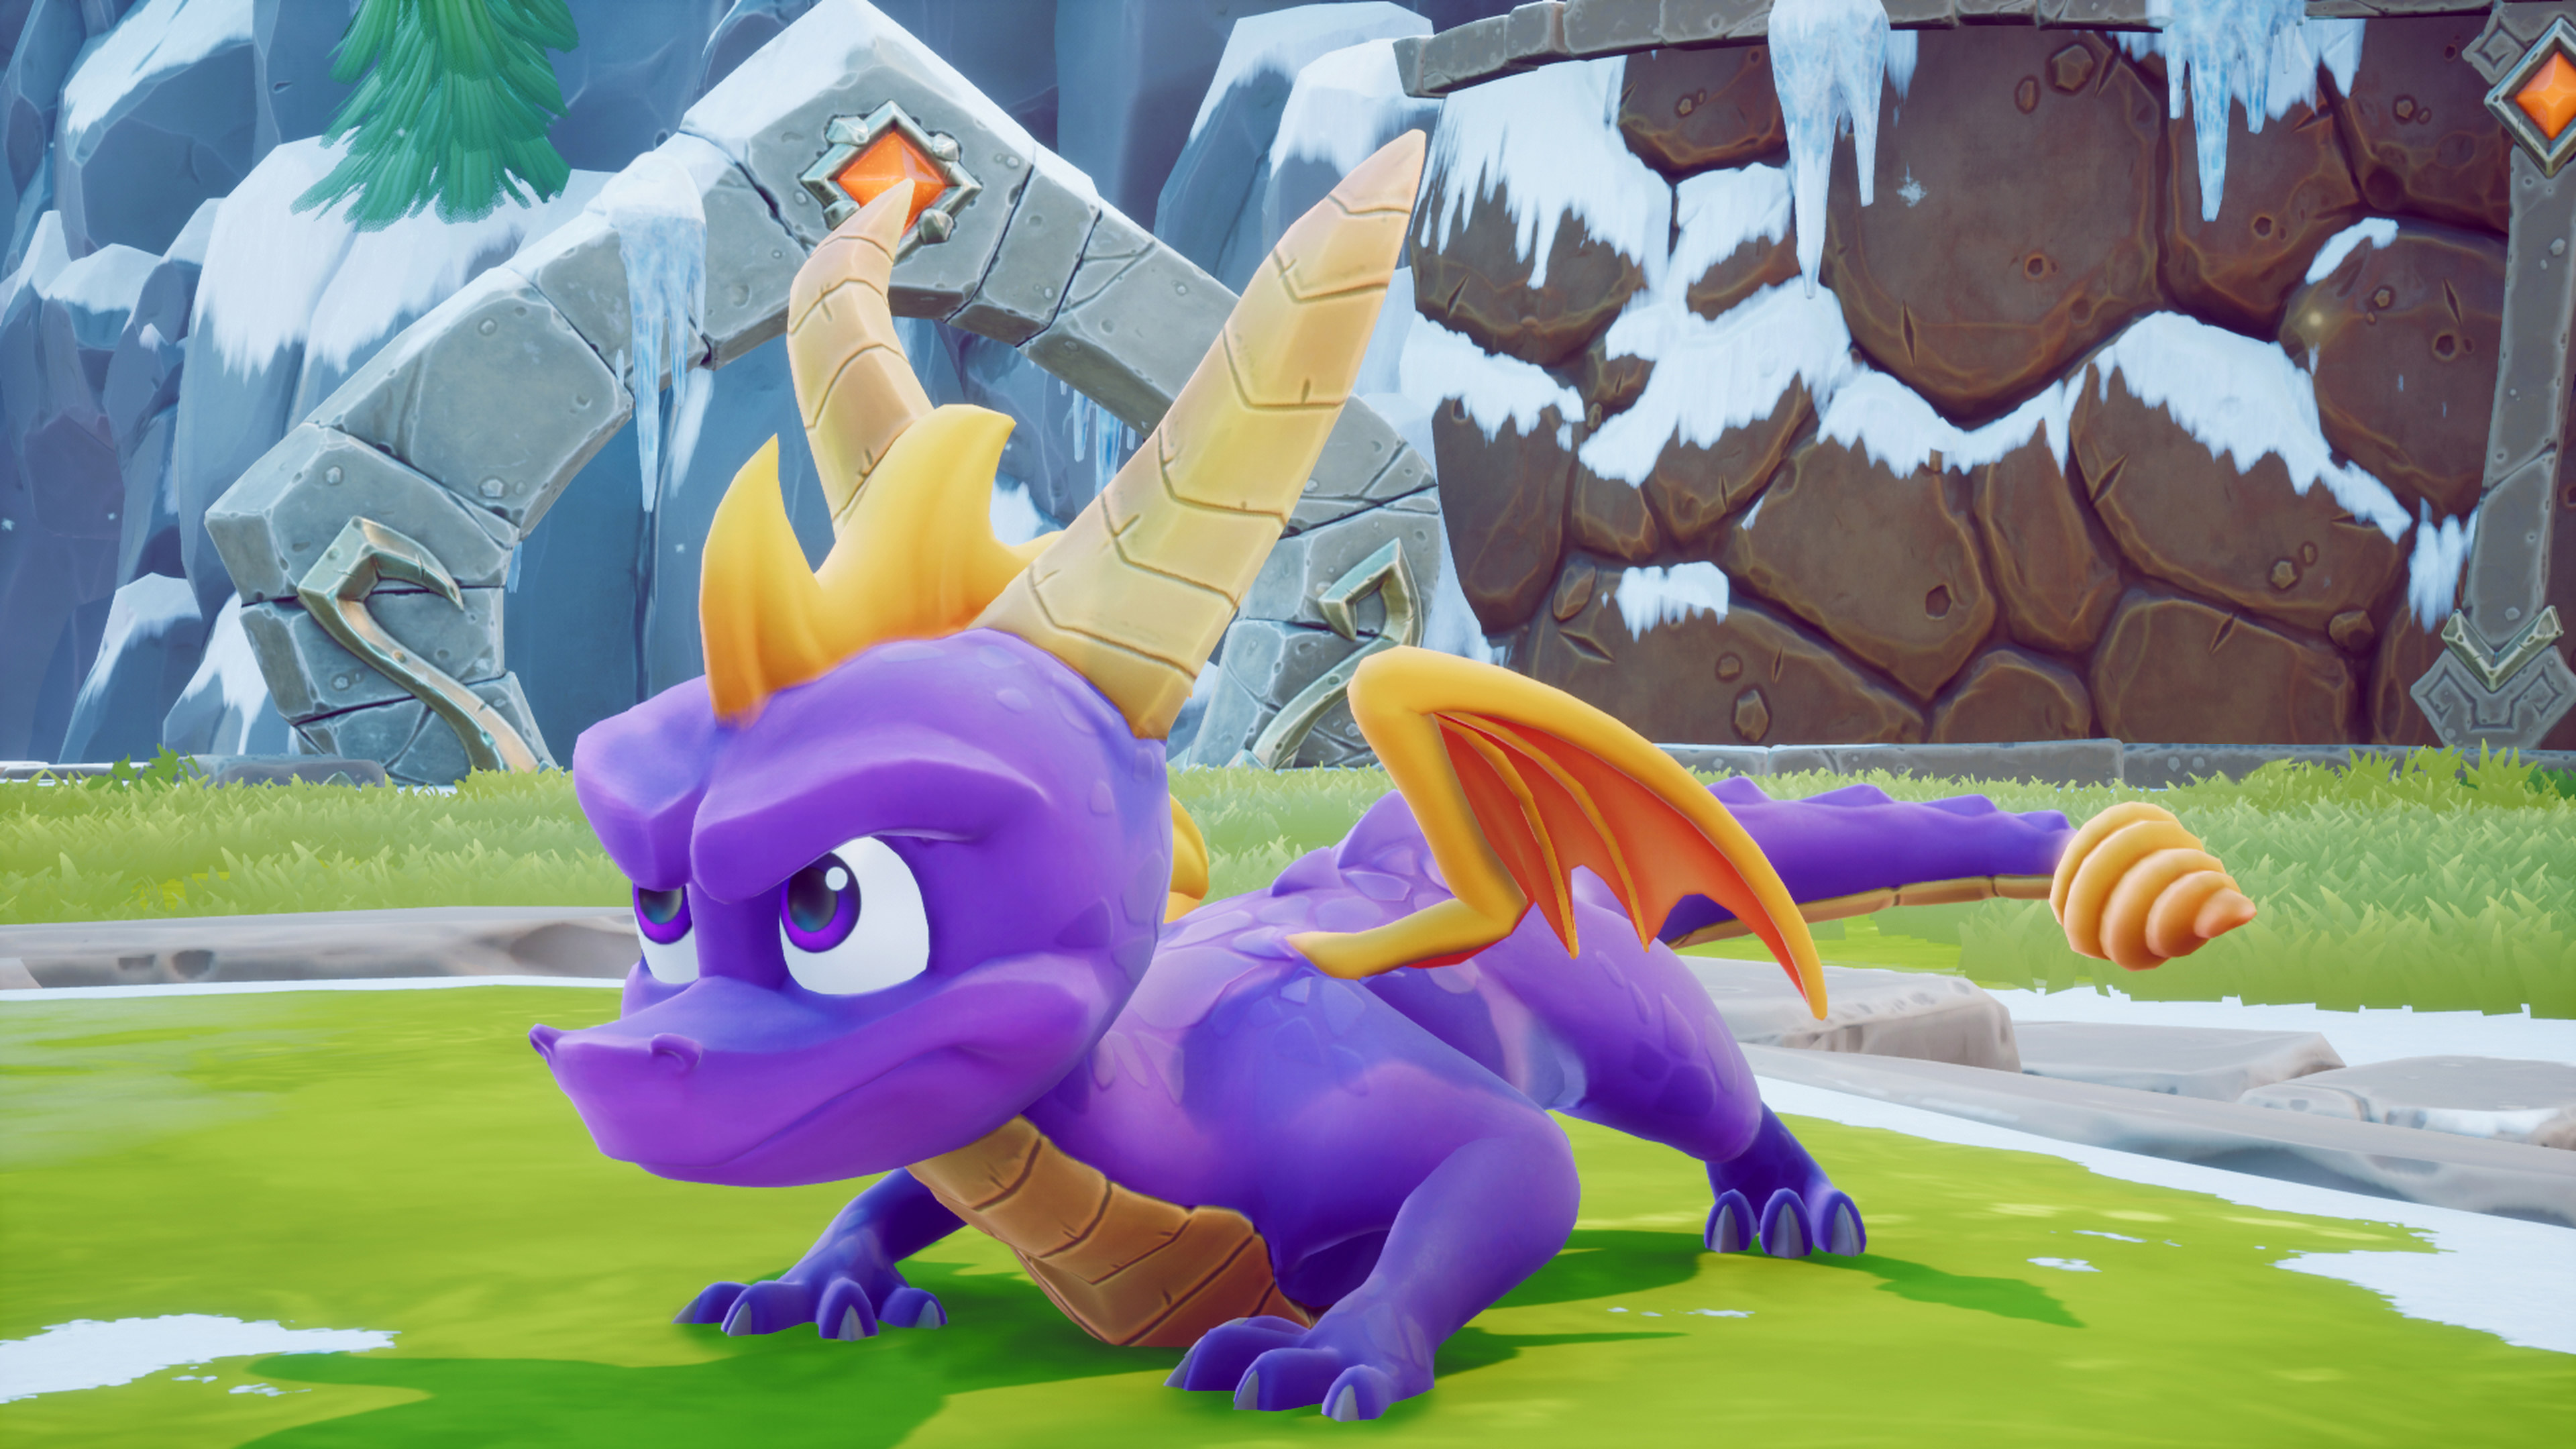 Activision Talks More About Spyro Reignited Trilogy And Destiny 2 DLC